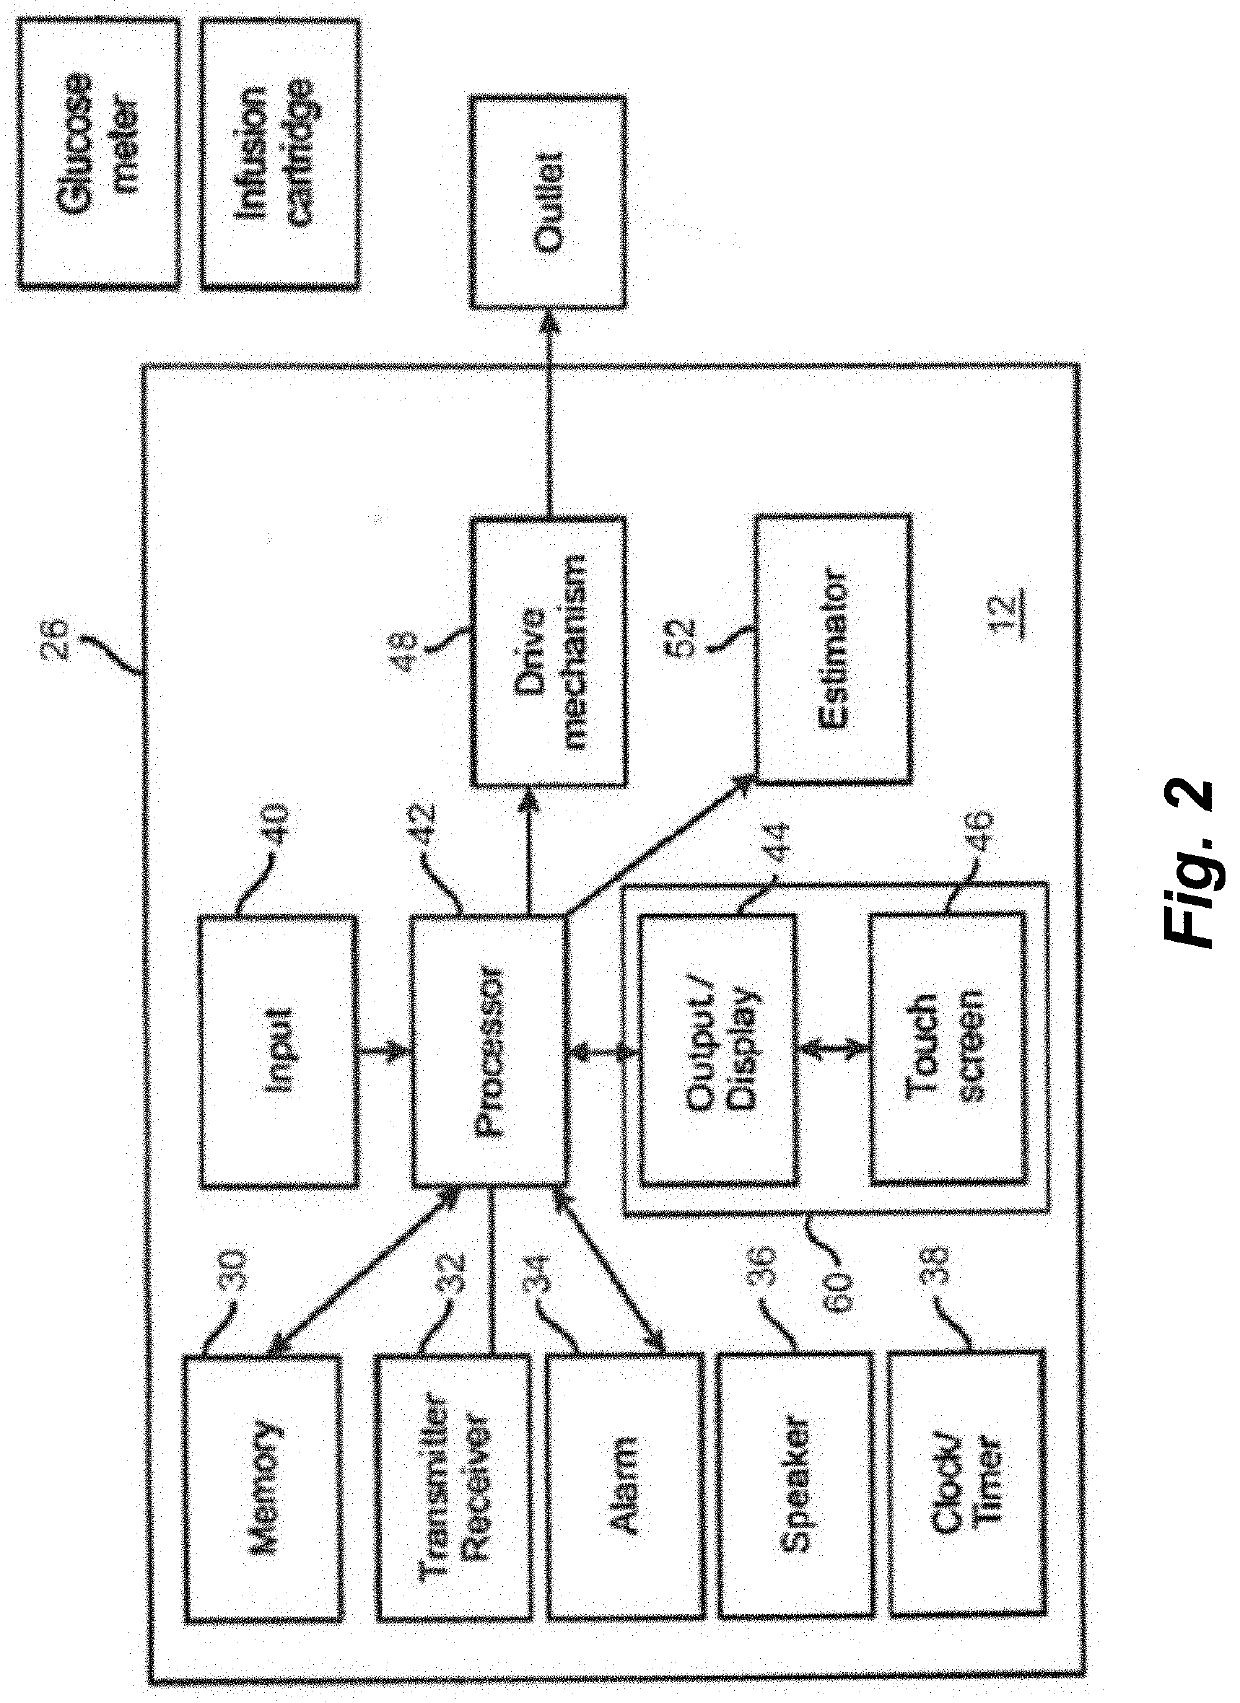 Methods and apparatus for monitoring infusion sites for ambulatory infusion pumps